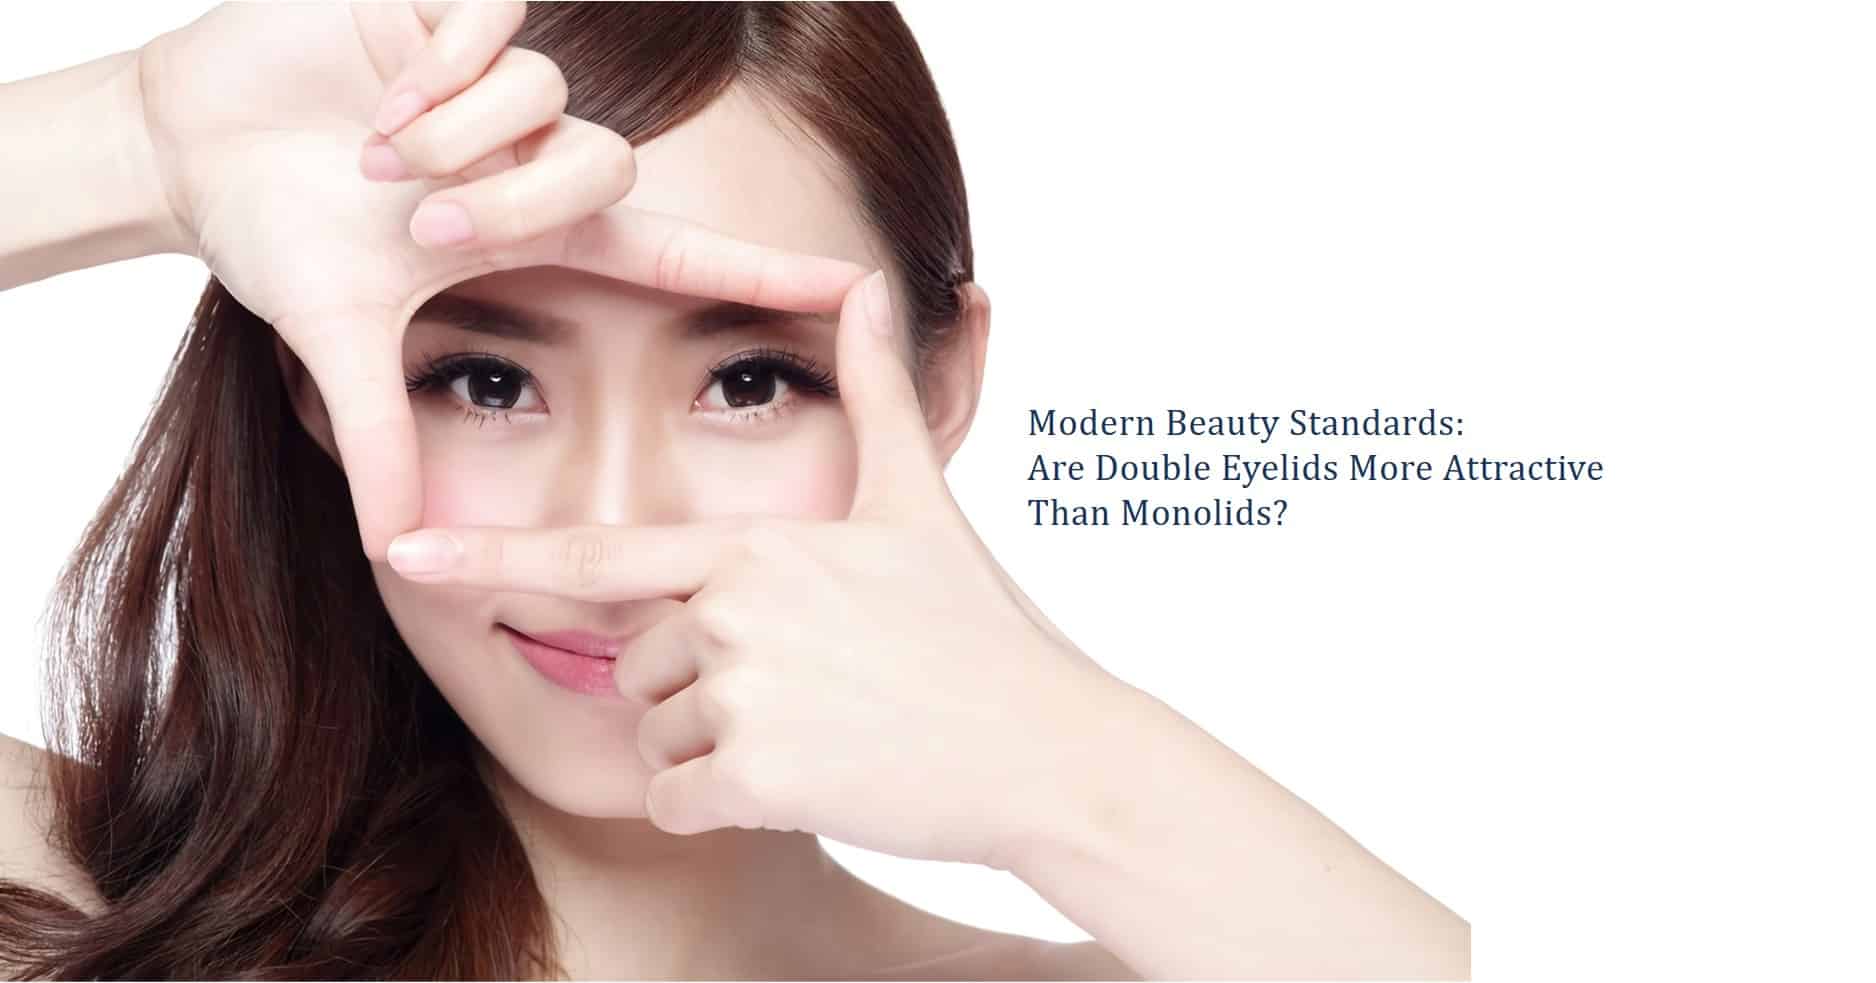 Modern Beauty Standards: Are Double Eyelids More Attractive Than Monolids?